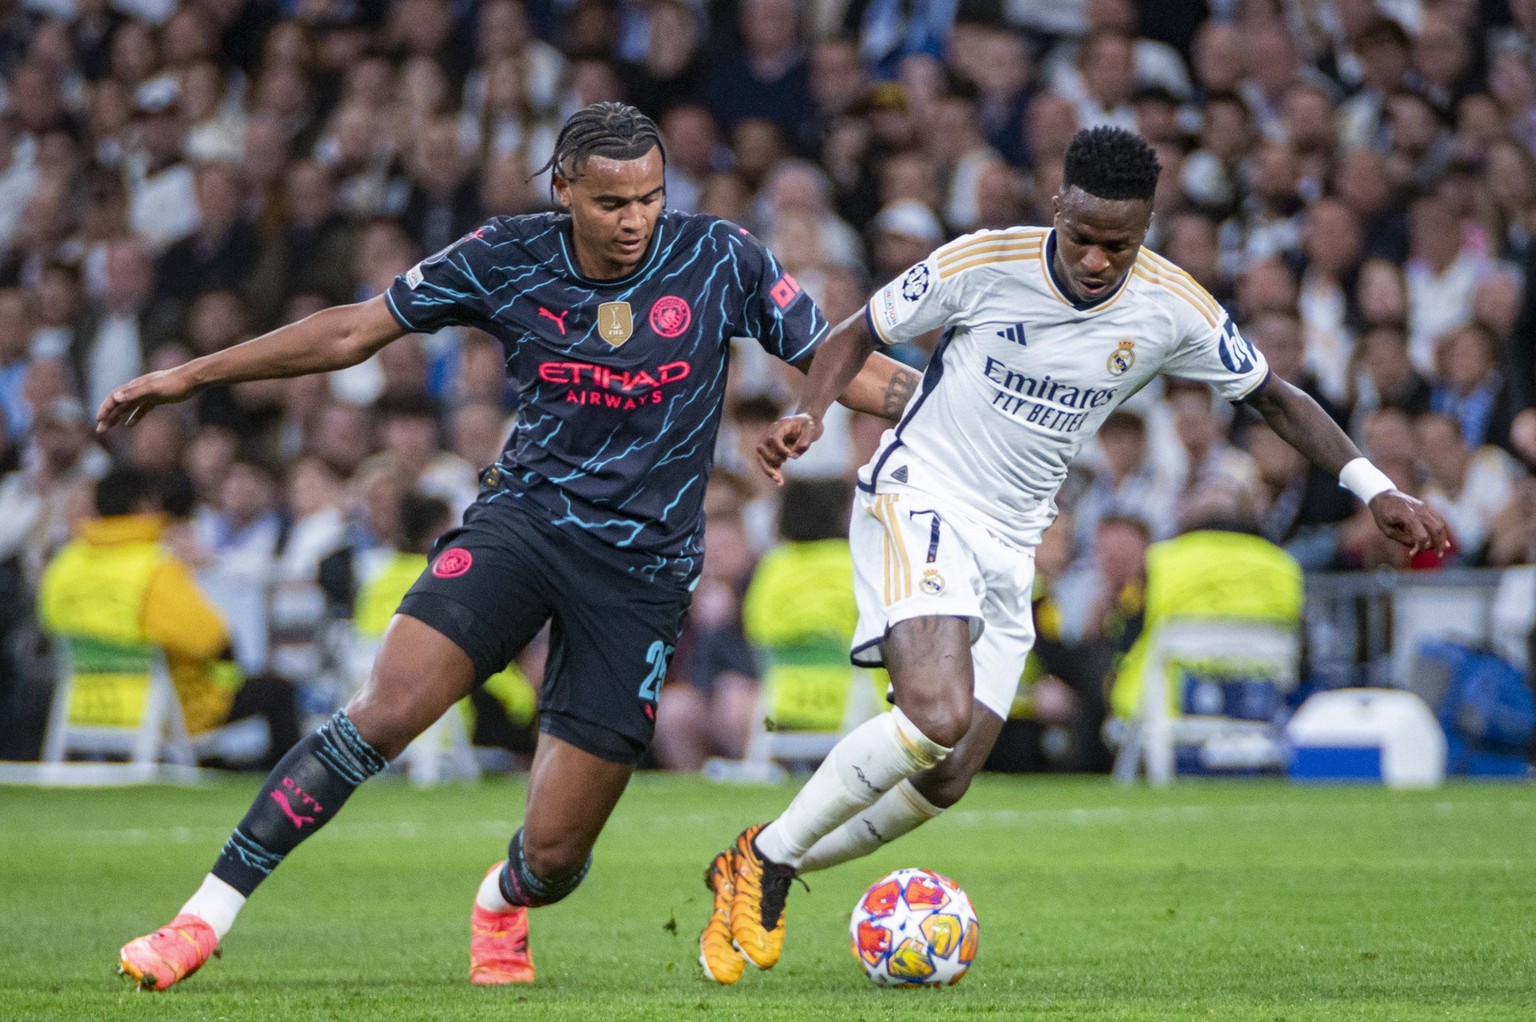 UEFA Champions League 2023/24 Quarter-final First Leg: Real Madrid CF v Manchester City Vinicius Junior of Real Madrid R in action against Manuel Akanji of Manchester City L during the UEFA Champions  ...